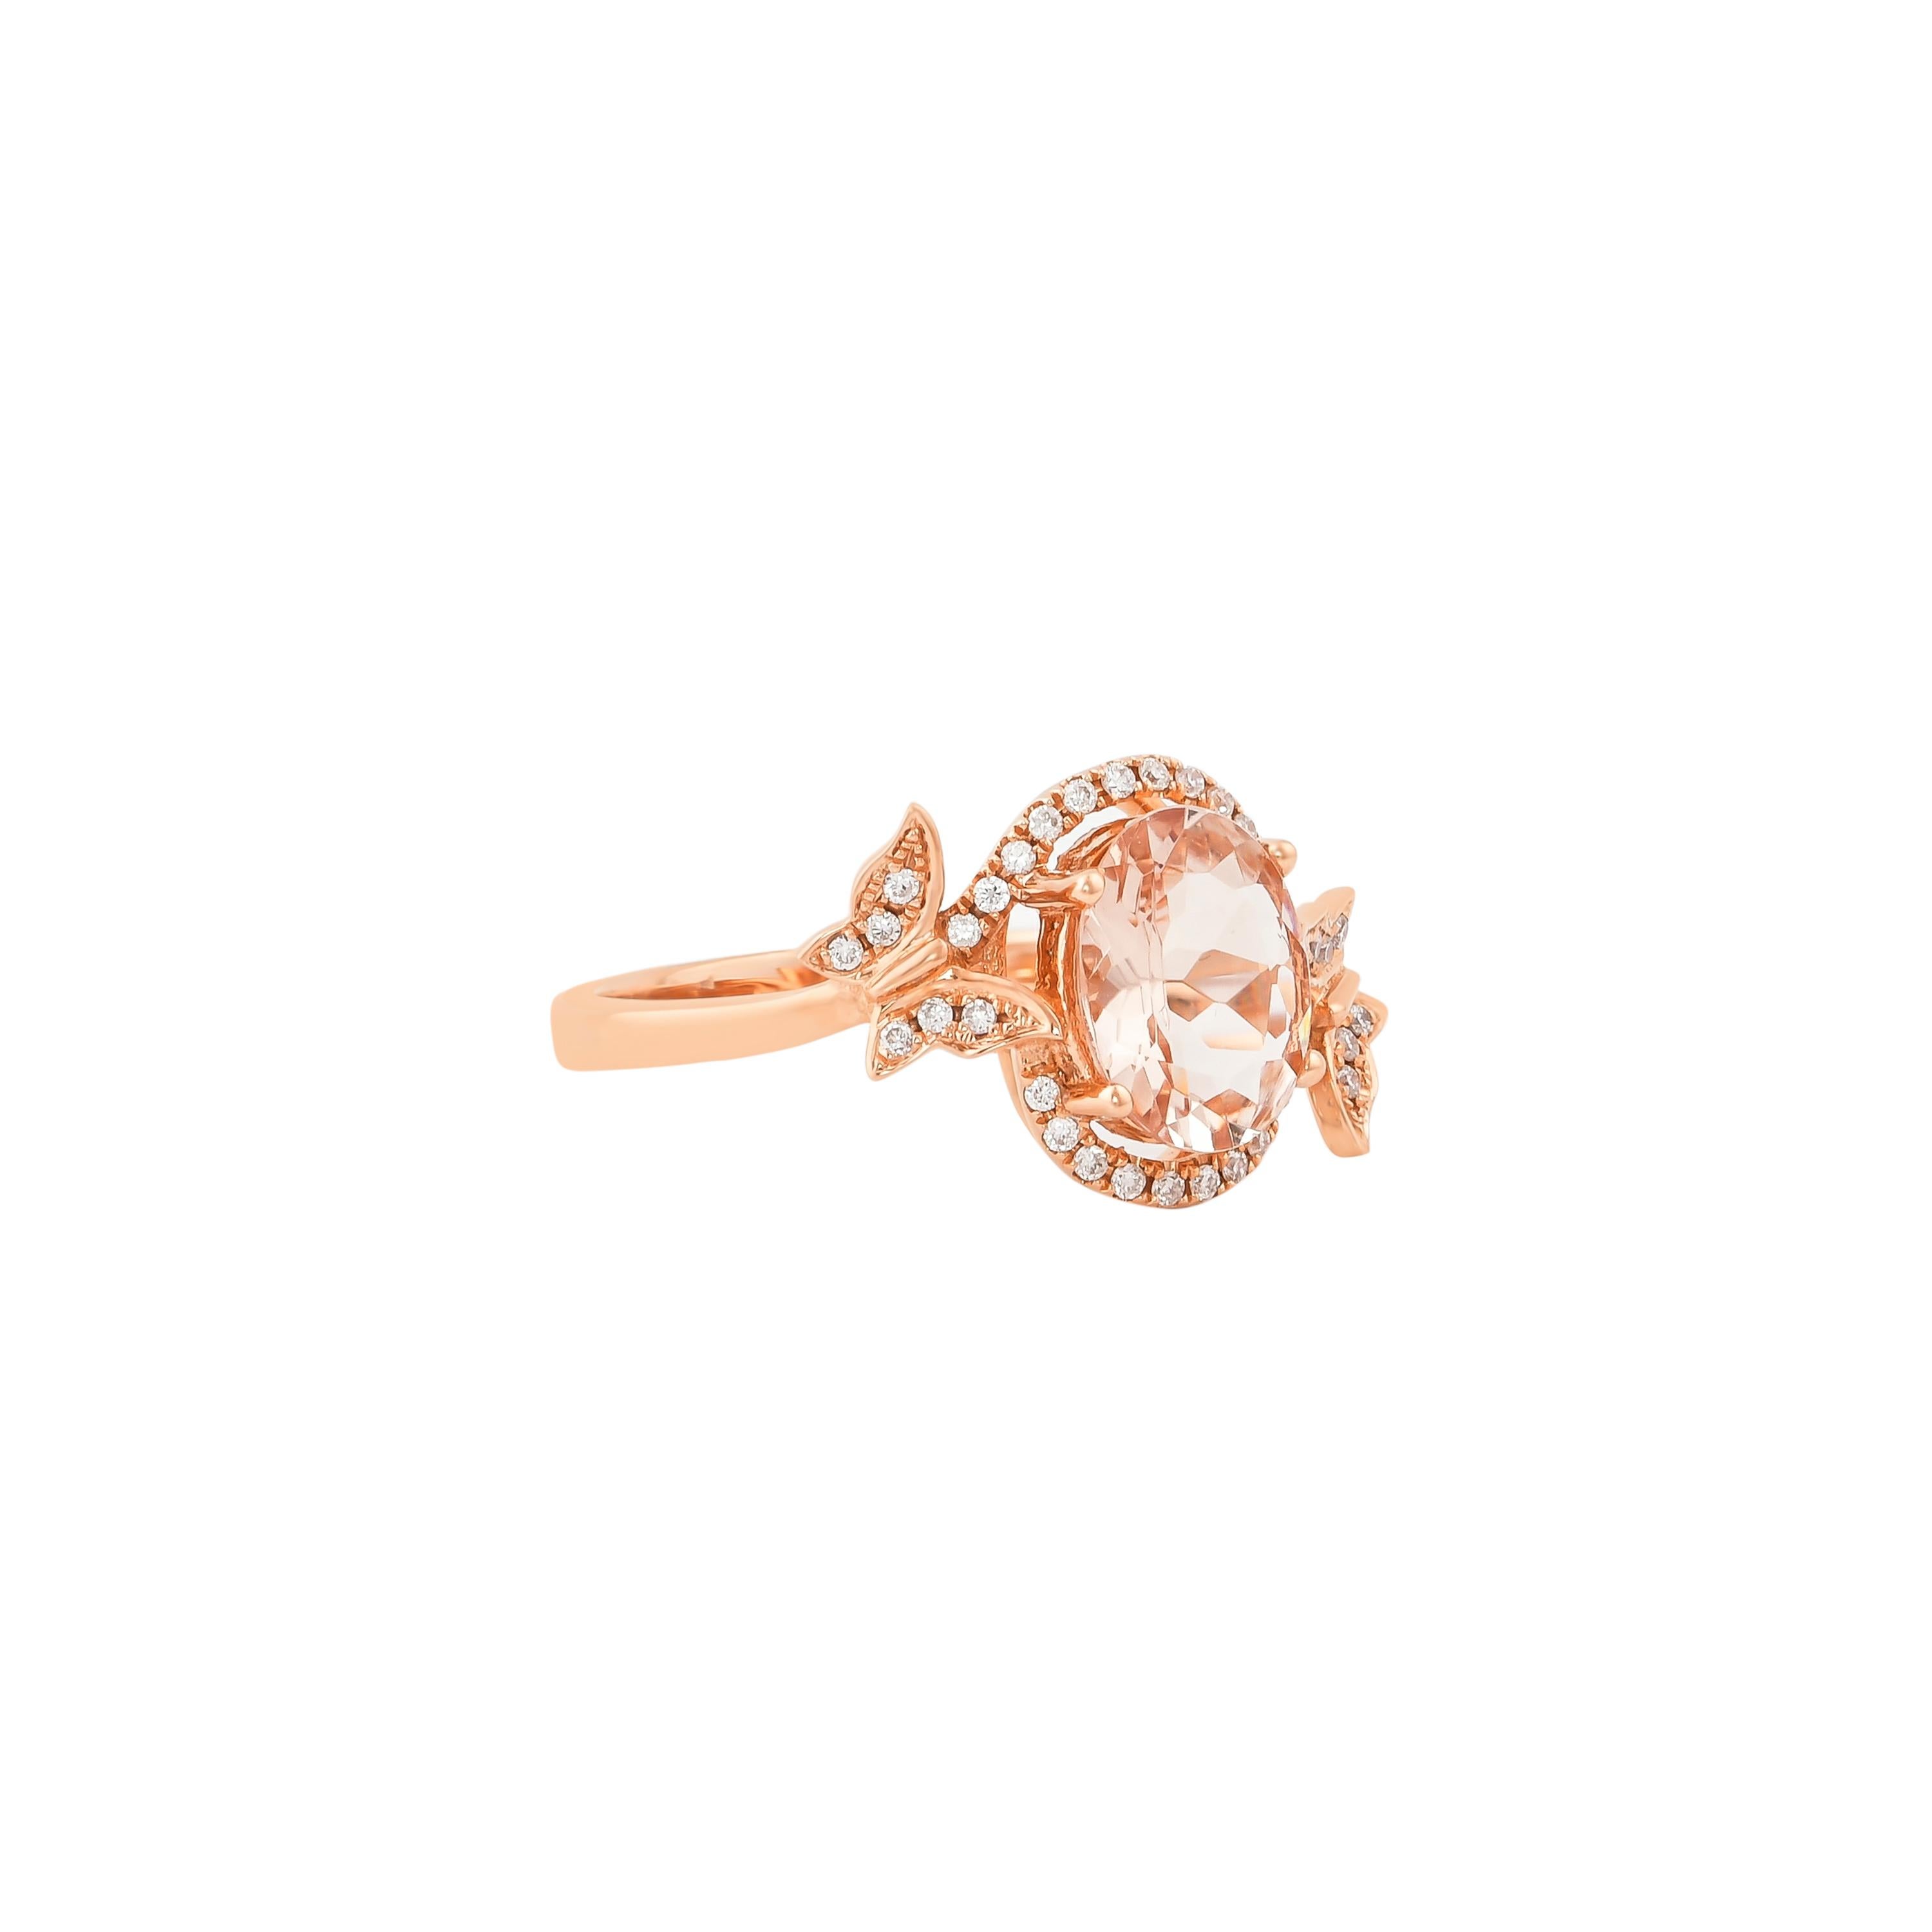 This collection features an array of magnificent morganites! Accented with Diamond these rings are made in rose gold and present a classic yet elegant look. 

Classic morganite ring in 18K Rose gold with Diamond. 

Morganite: 1.32 carat, 9X7mm size,